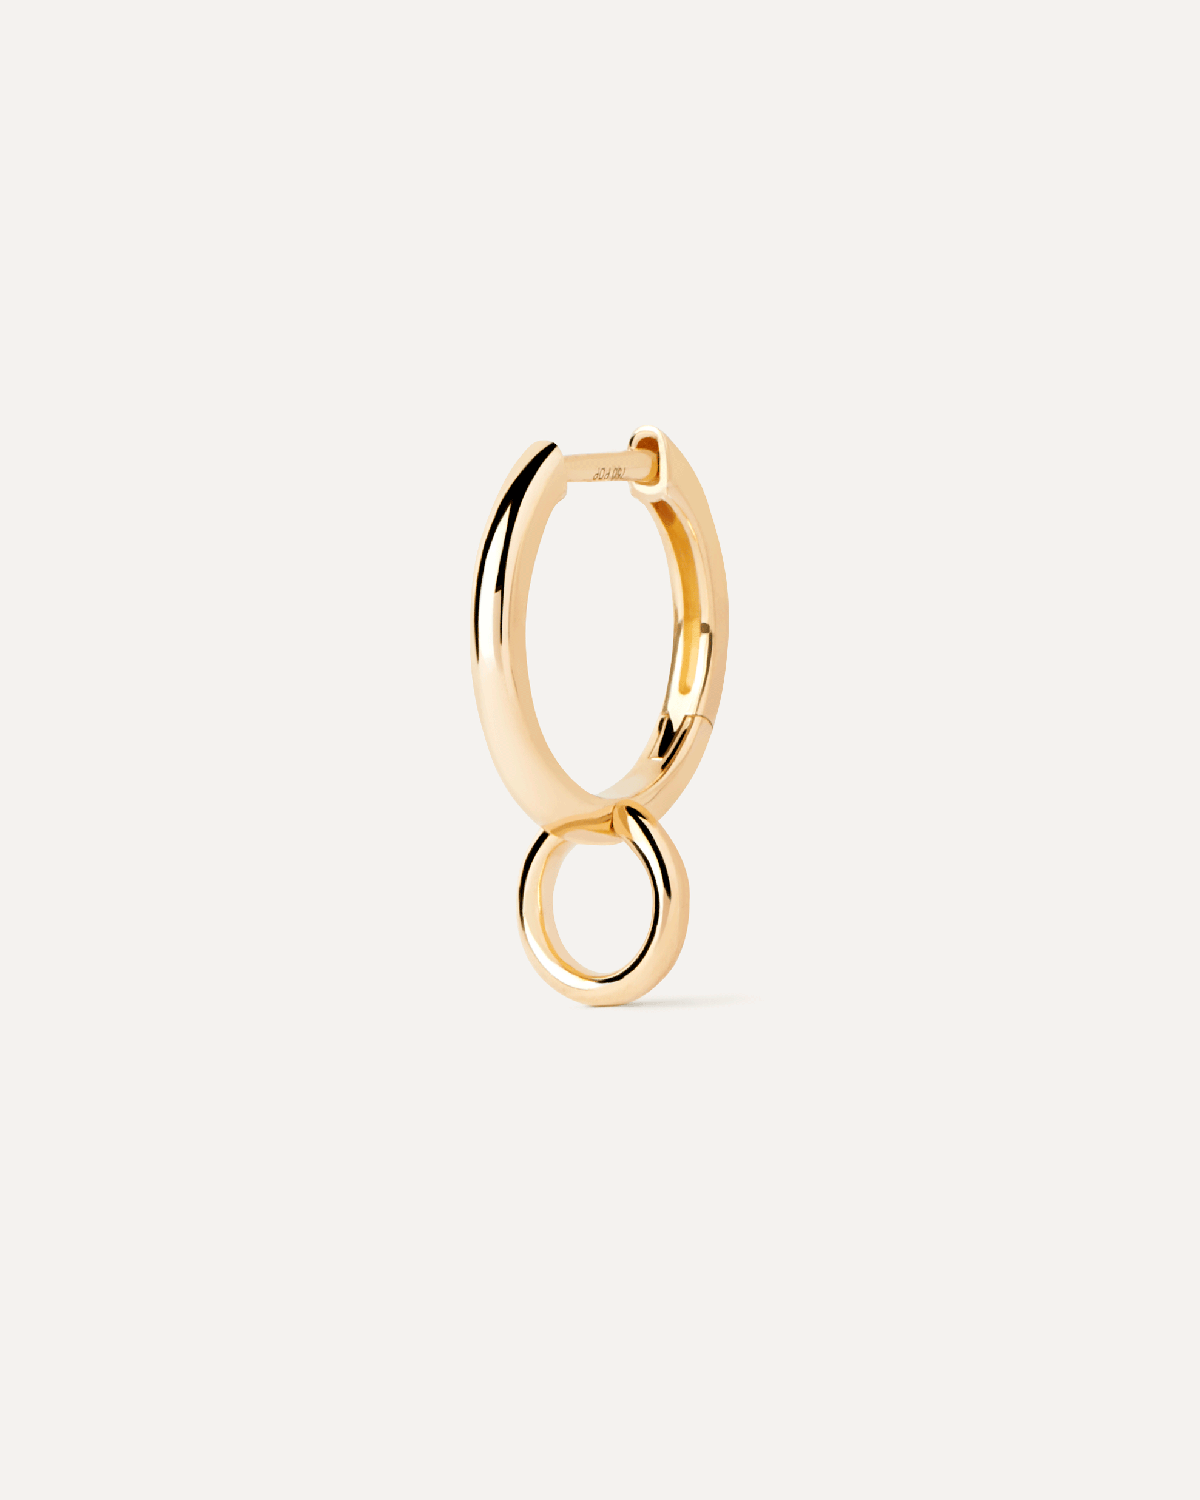 Gold Circle single hoop. Sleek single hoop in solid yellow gold with a swinging circle pendant. Get the latest arrival from PDPAOLA. Place your order safely and get this Best Seller.